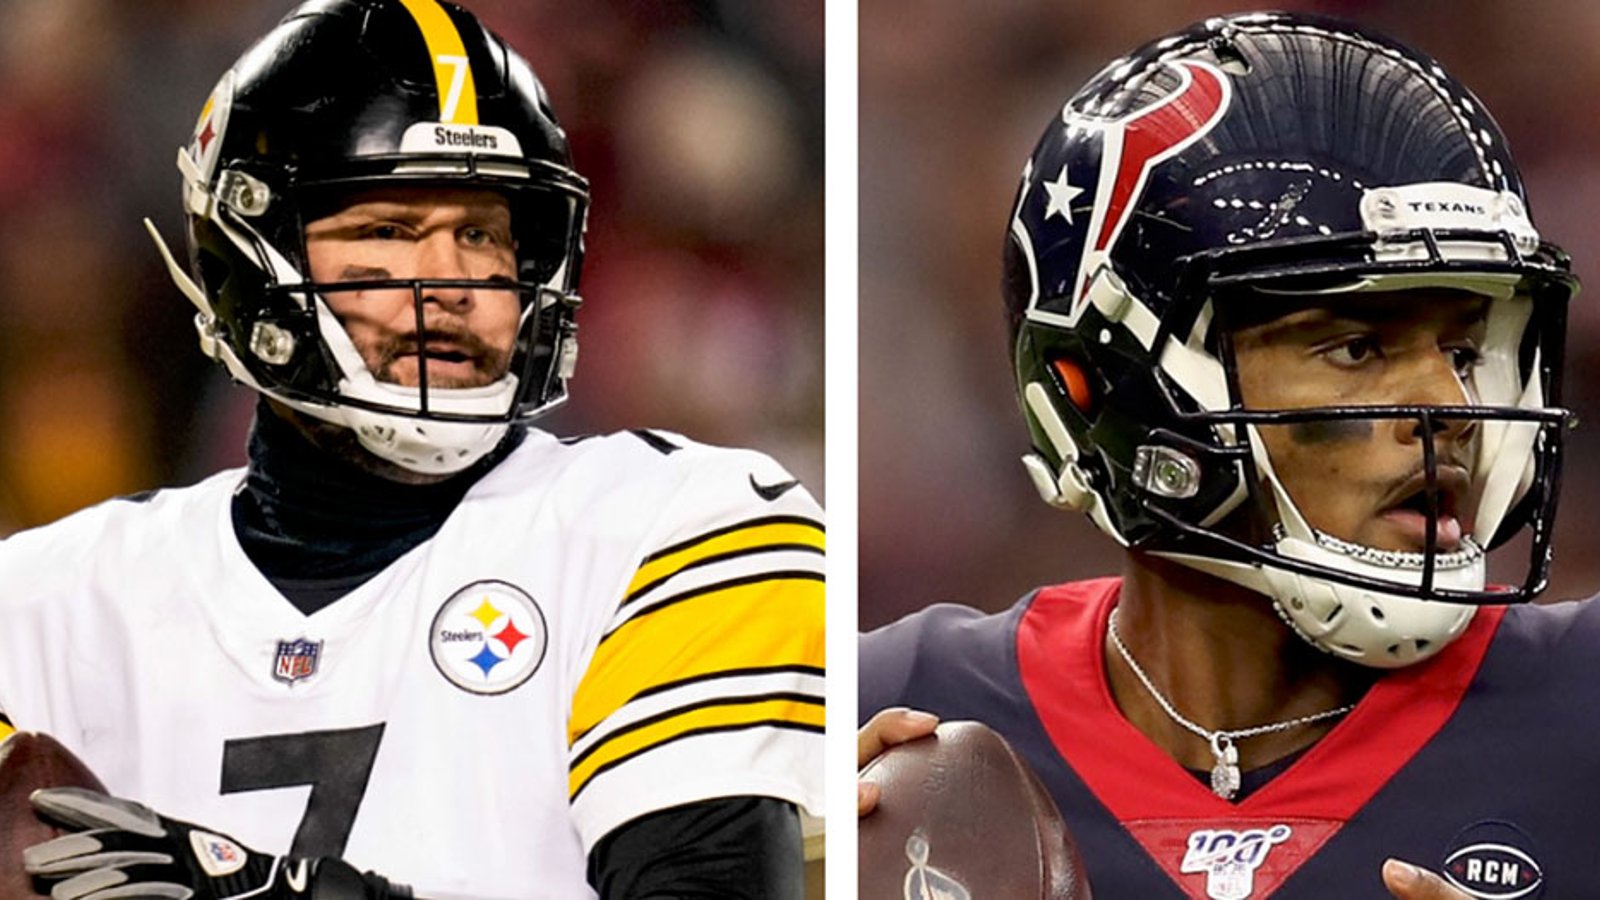 Watson team reportedly to use Ben Roethlisberger case in defense 